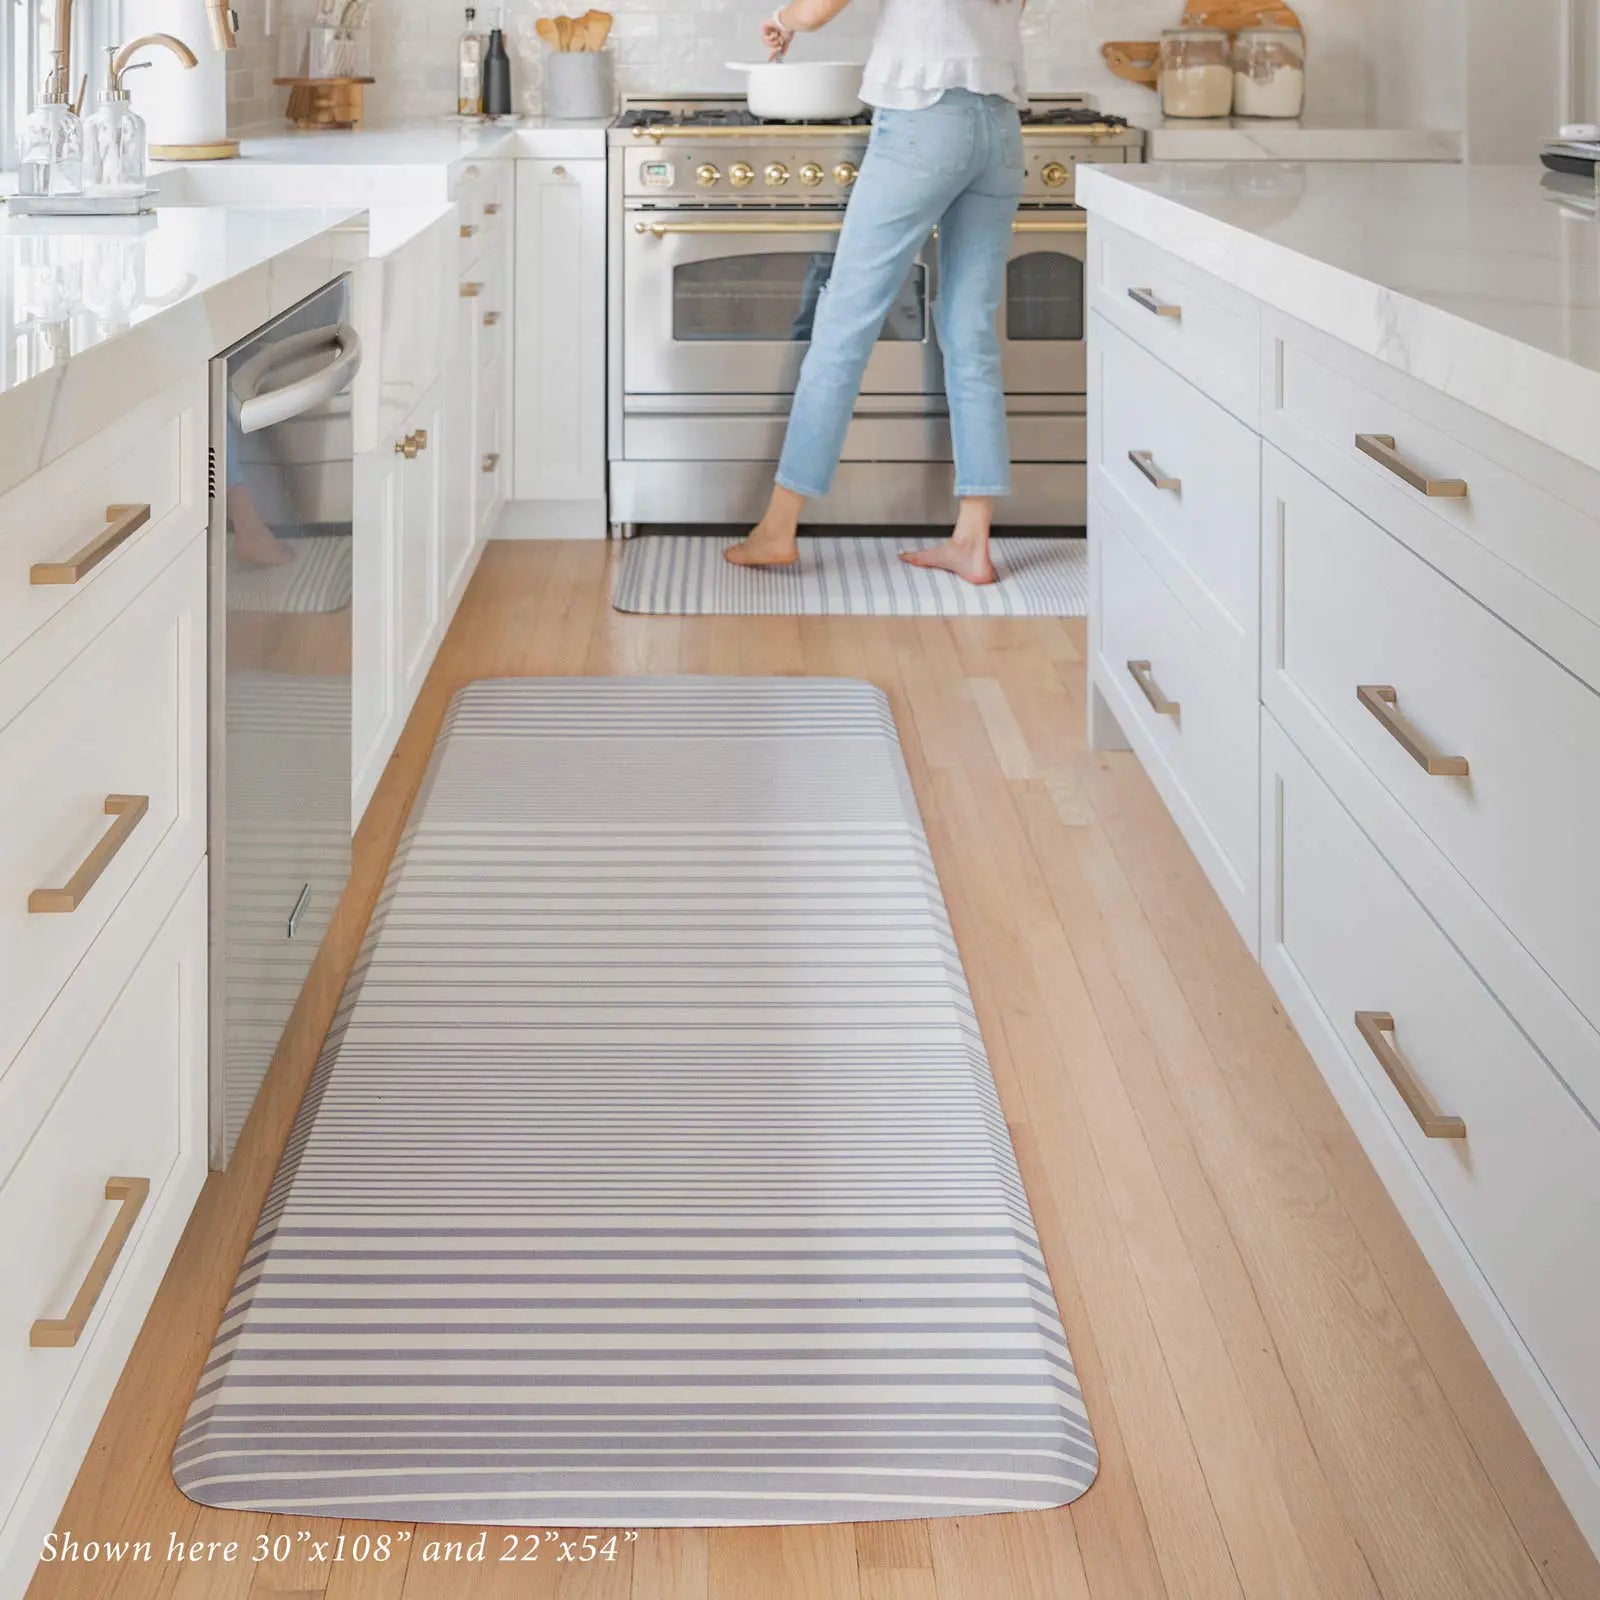 Nantucket Coastal Minimal Blue Ivory Stripe Standing Mat in kitchen with woman with size 22x54 and 30x108